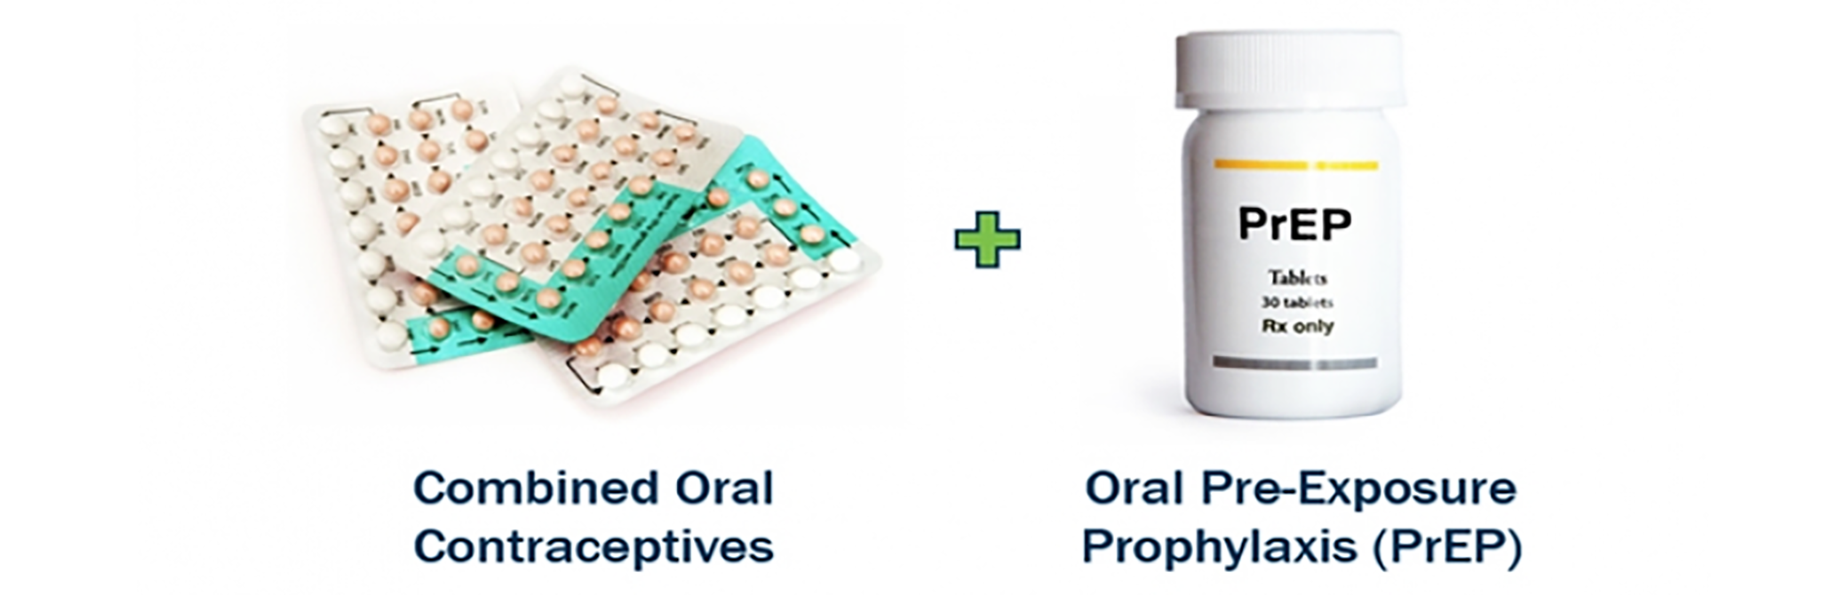 image of oral contraceptives and oral PrEP Ideas. Evidence. Impact.